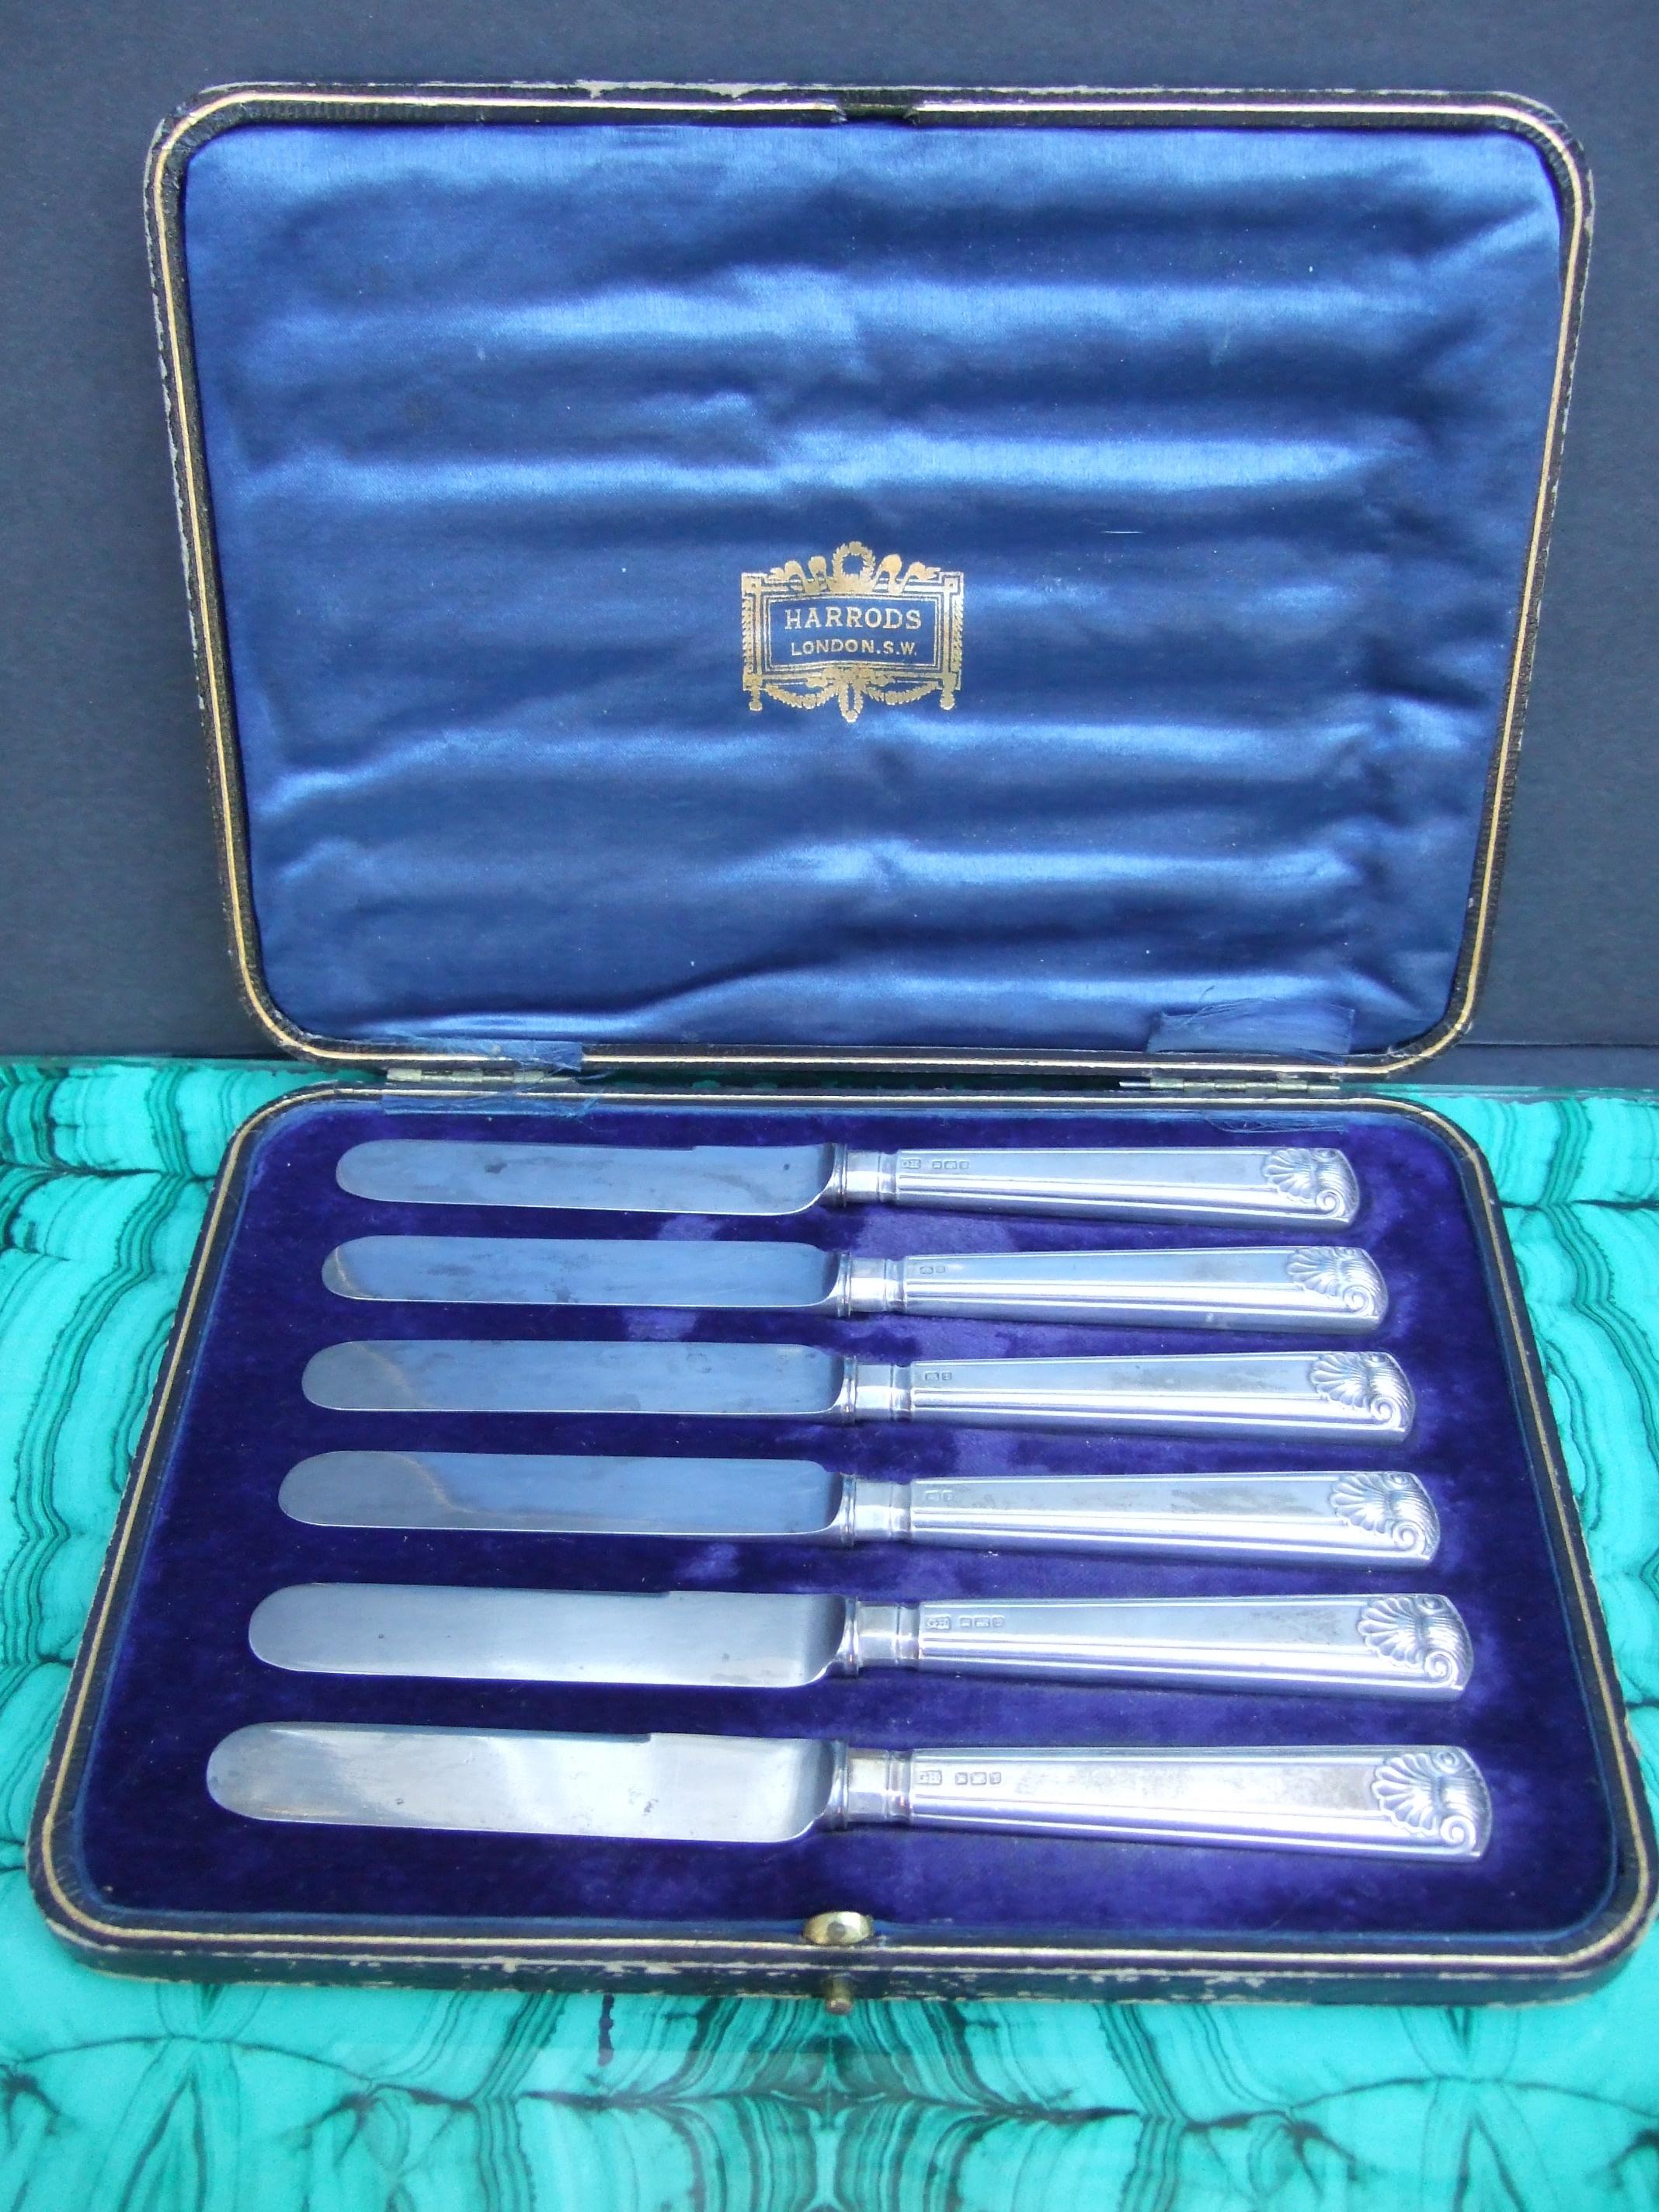 Harrod's London Set of six small appetizer knives in the original silk lined presentation box c 1920s

The elegant set of appetizer knives have a scallop shell design on the handle   
Makes an elegant fine dining collectible 

The knives measure 6.5